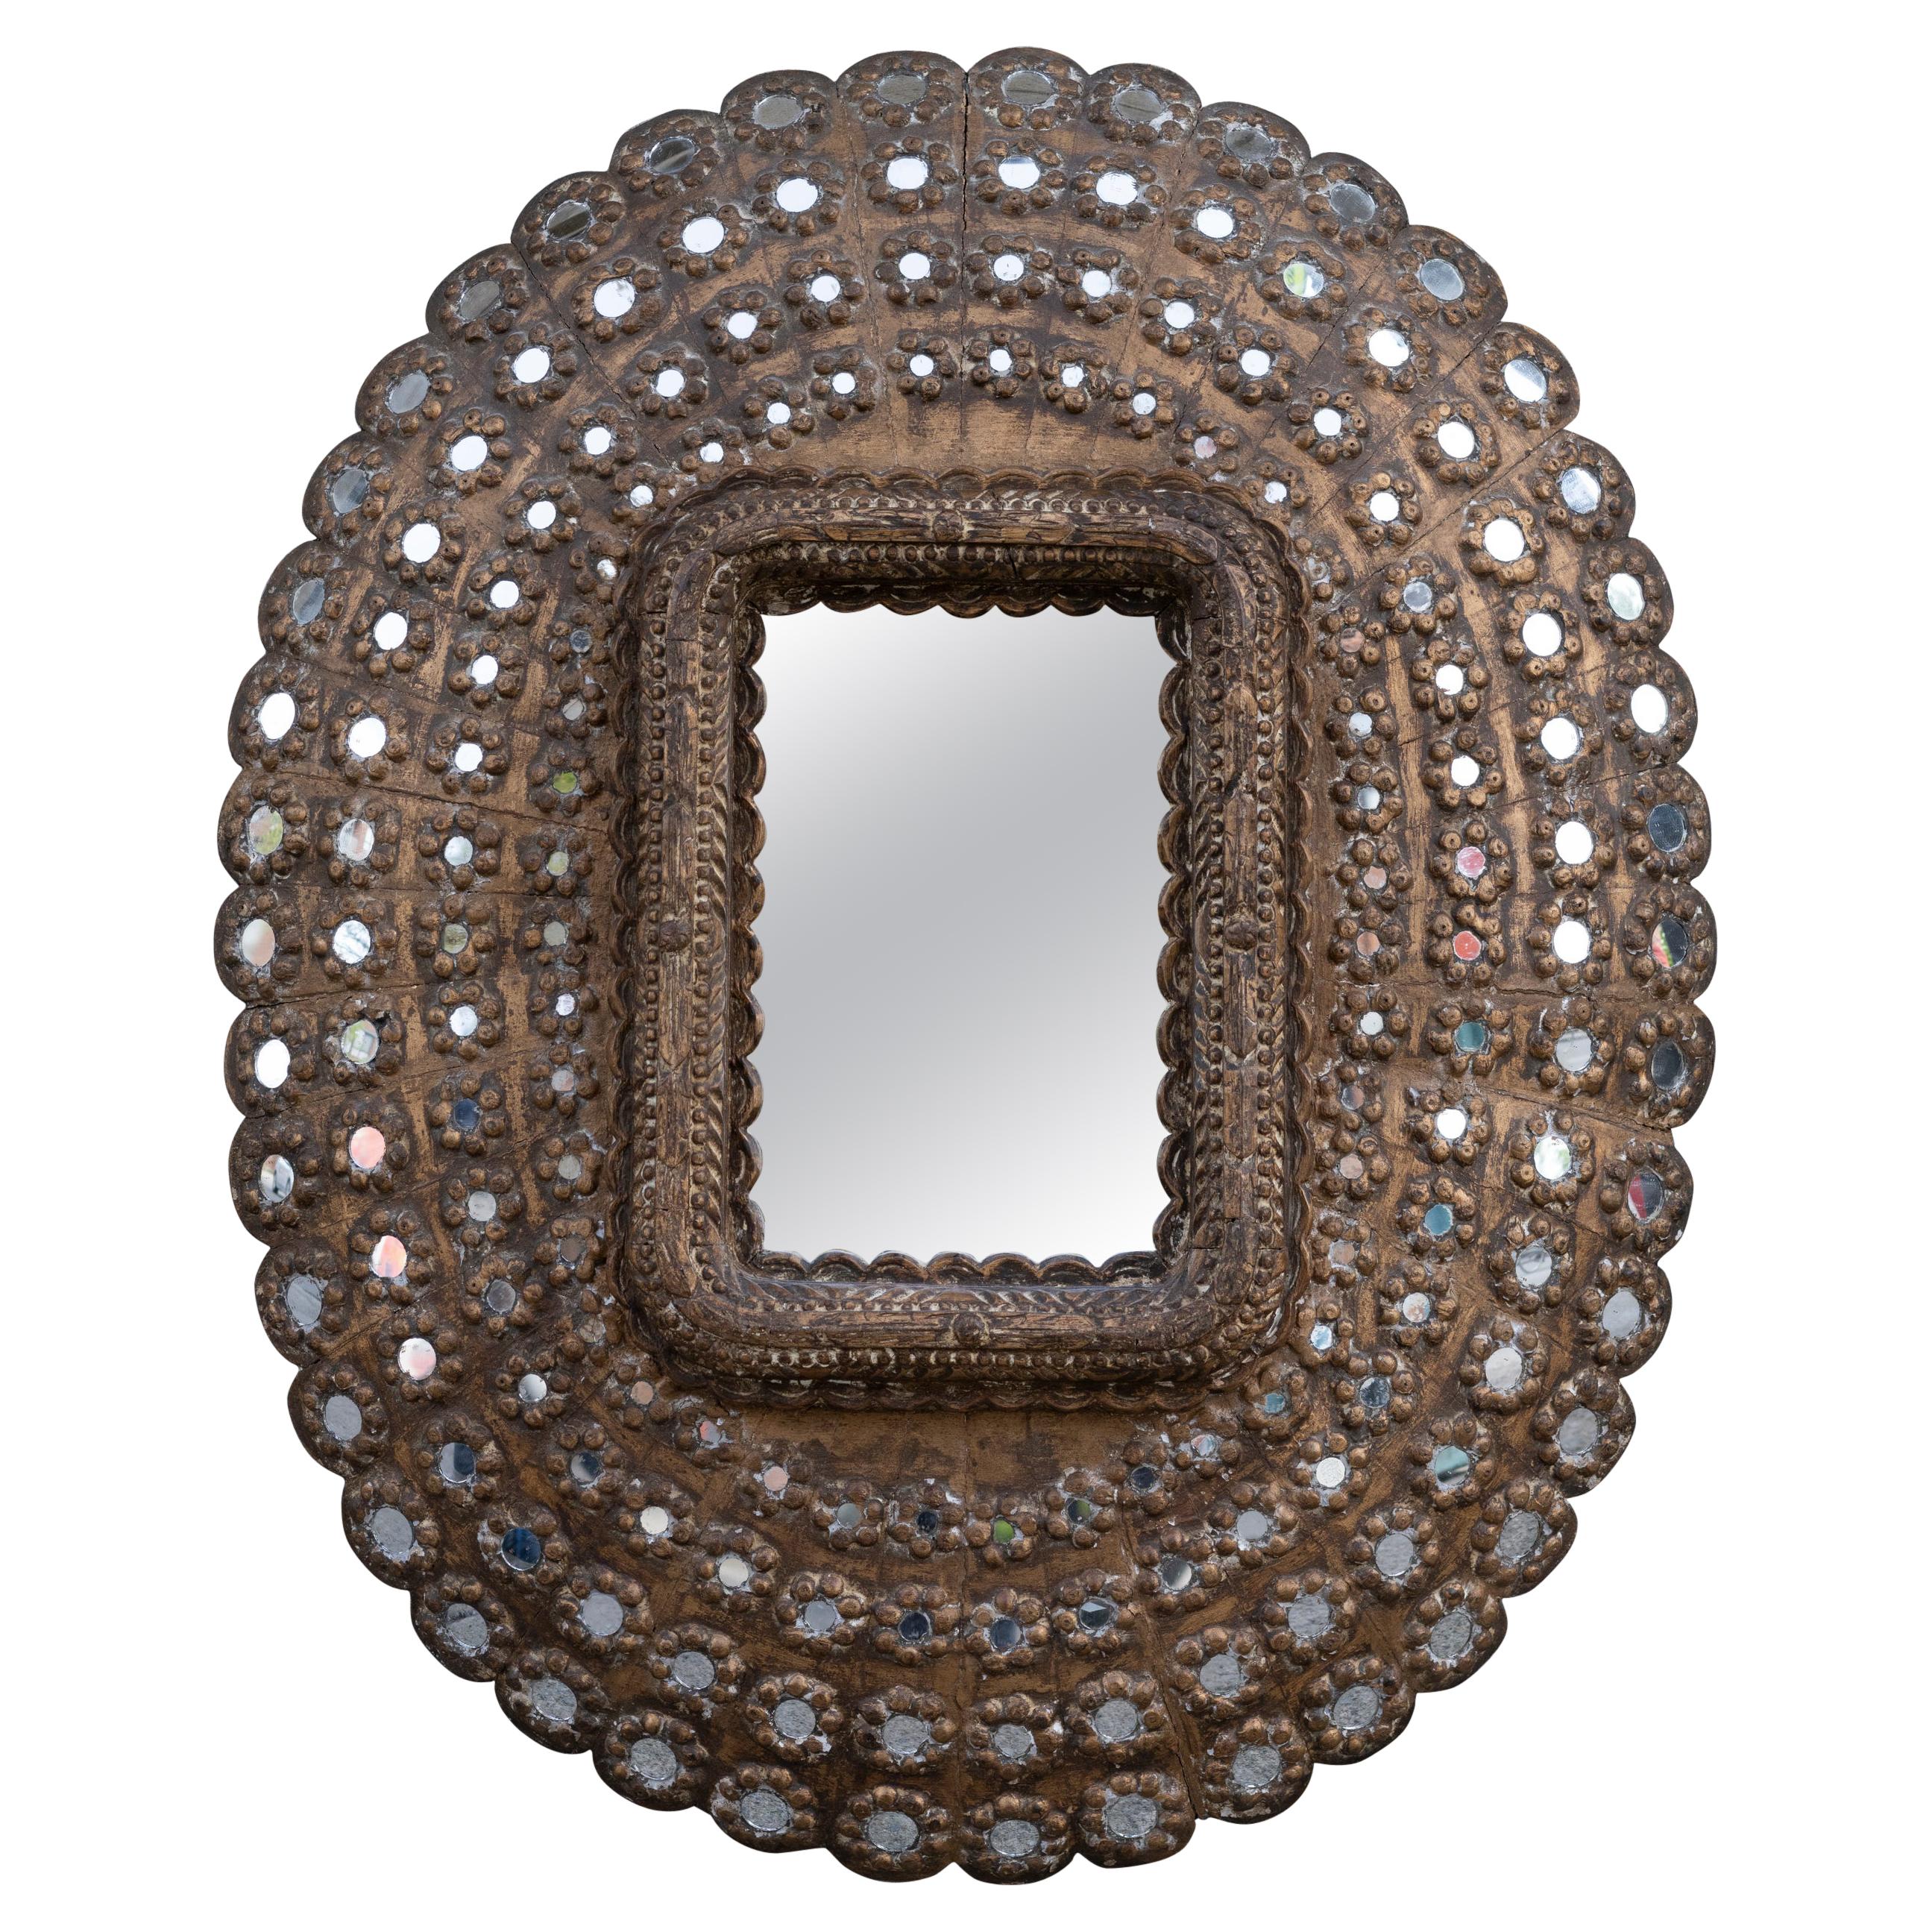 Large Decorative Carved Wood "Peacock" Oval Mirror